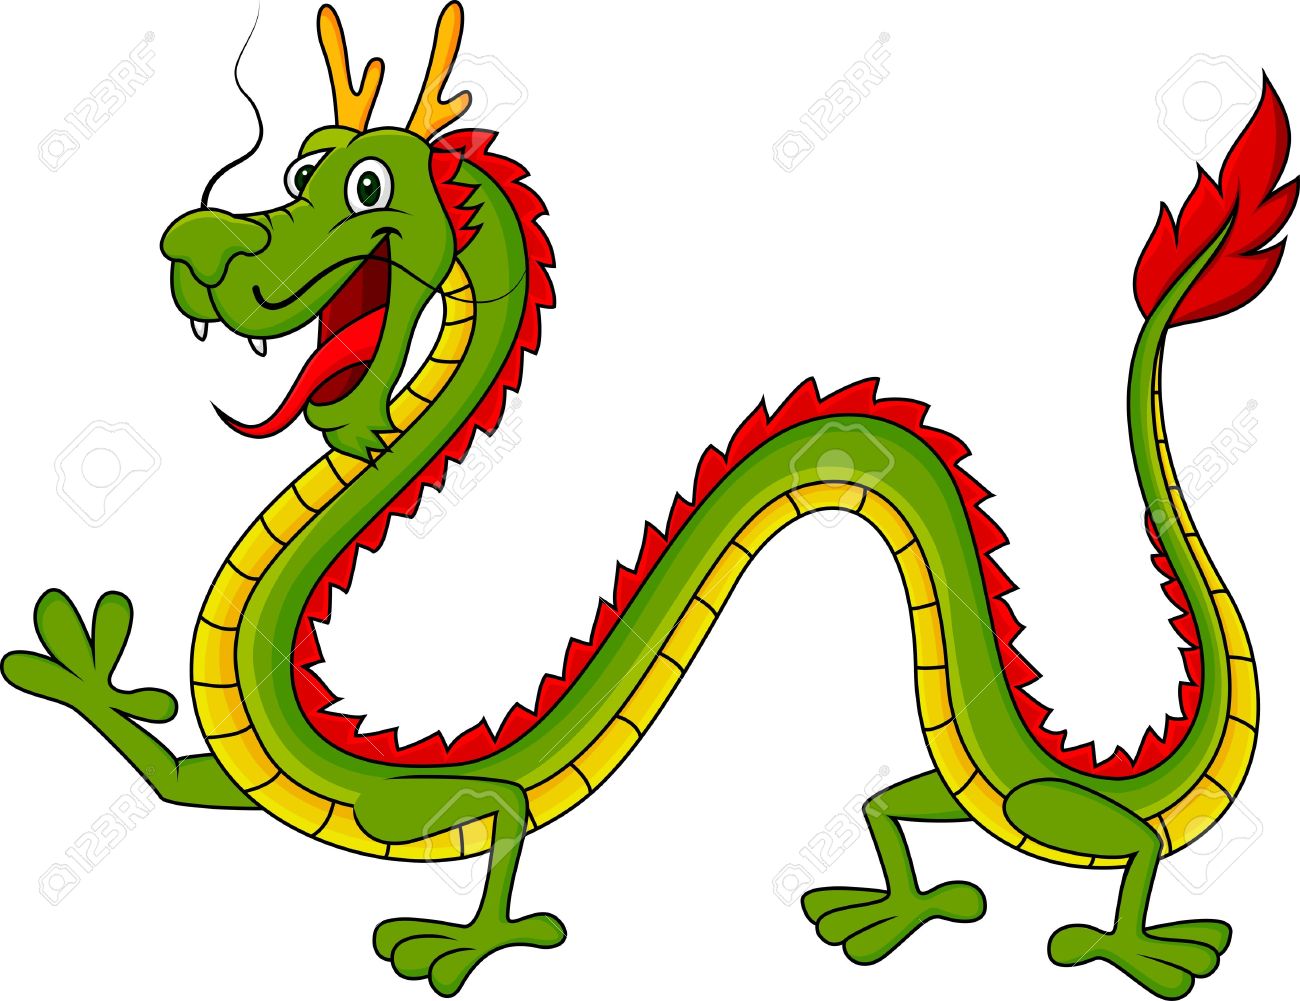 Chinese Dragon Images.